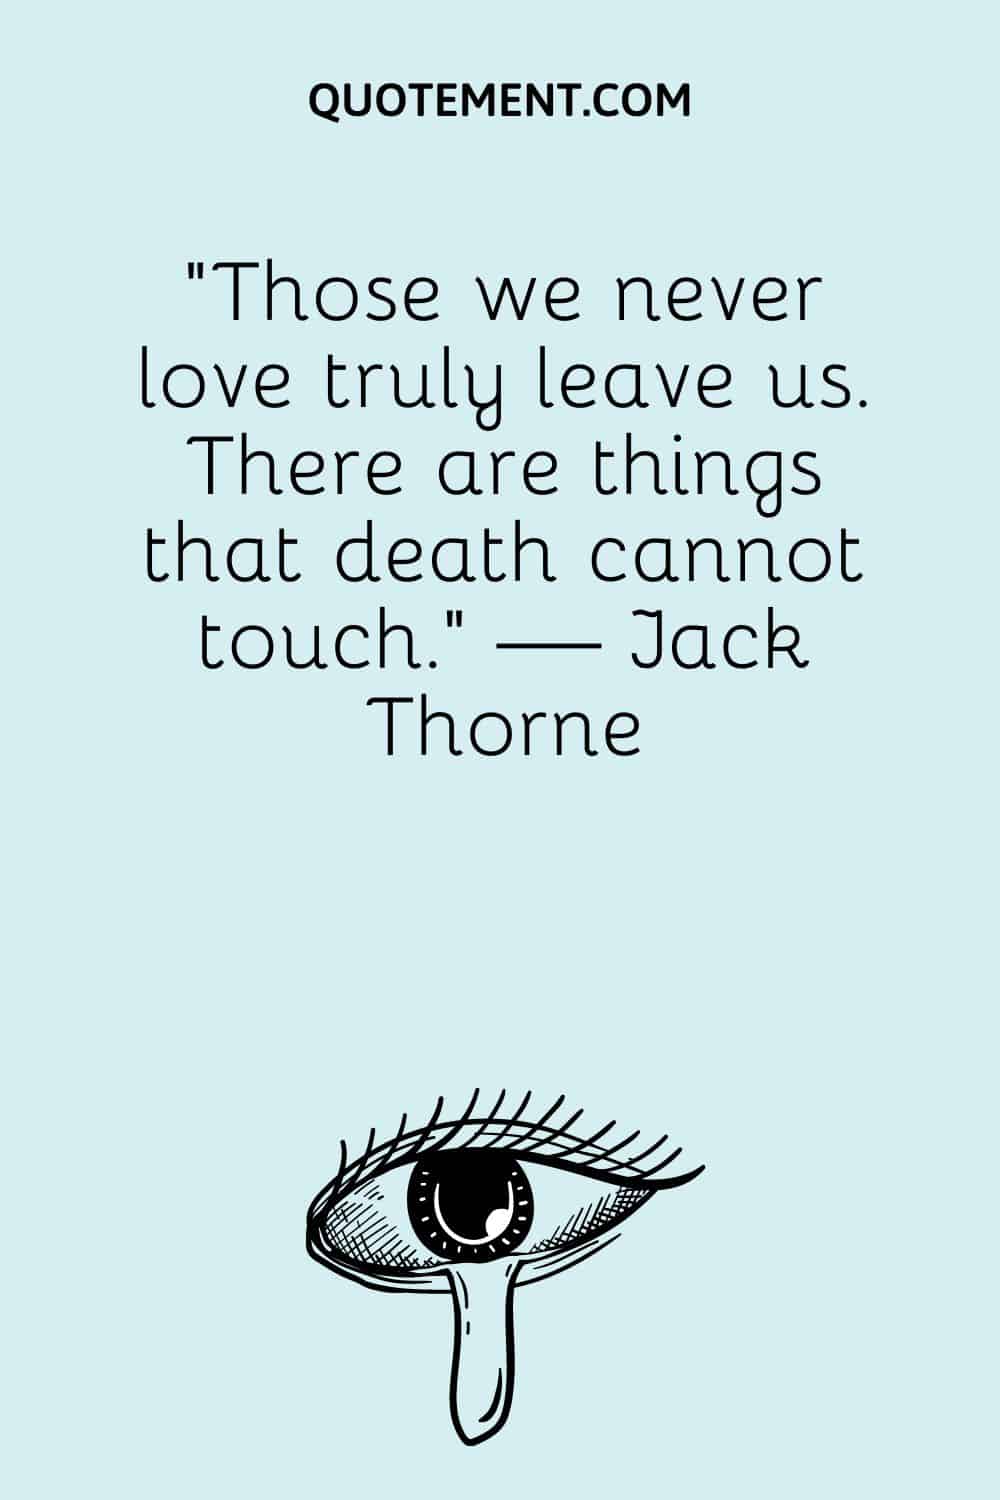 “Those we never love truly leave us. There are things that death cannot touch.” — Jack Thorne